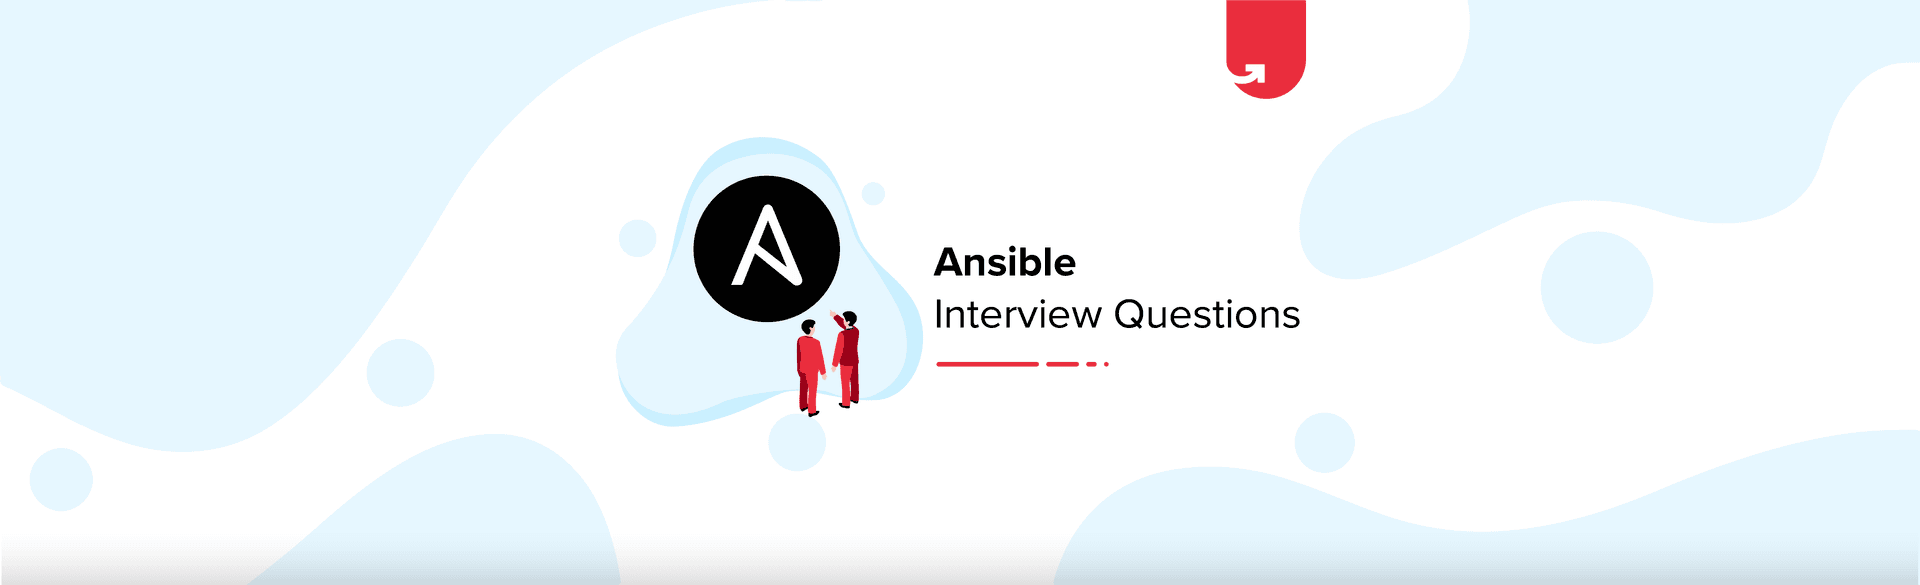 Top 25 Ansible Interview Questions &#038; Answers [For Freshers &#038; Experienced]